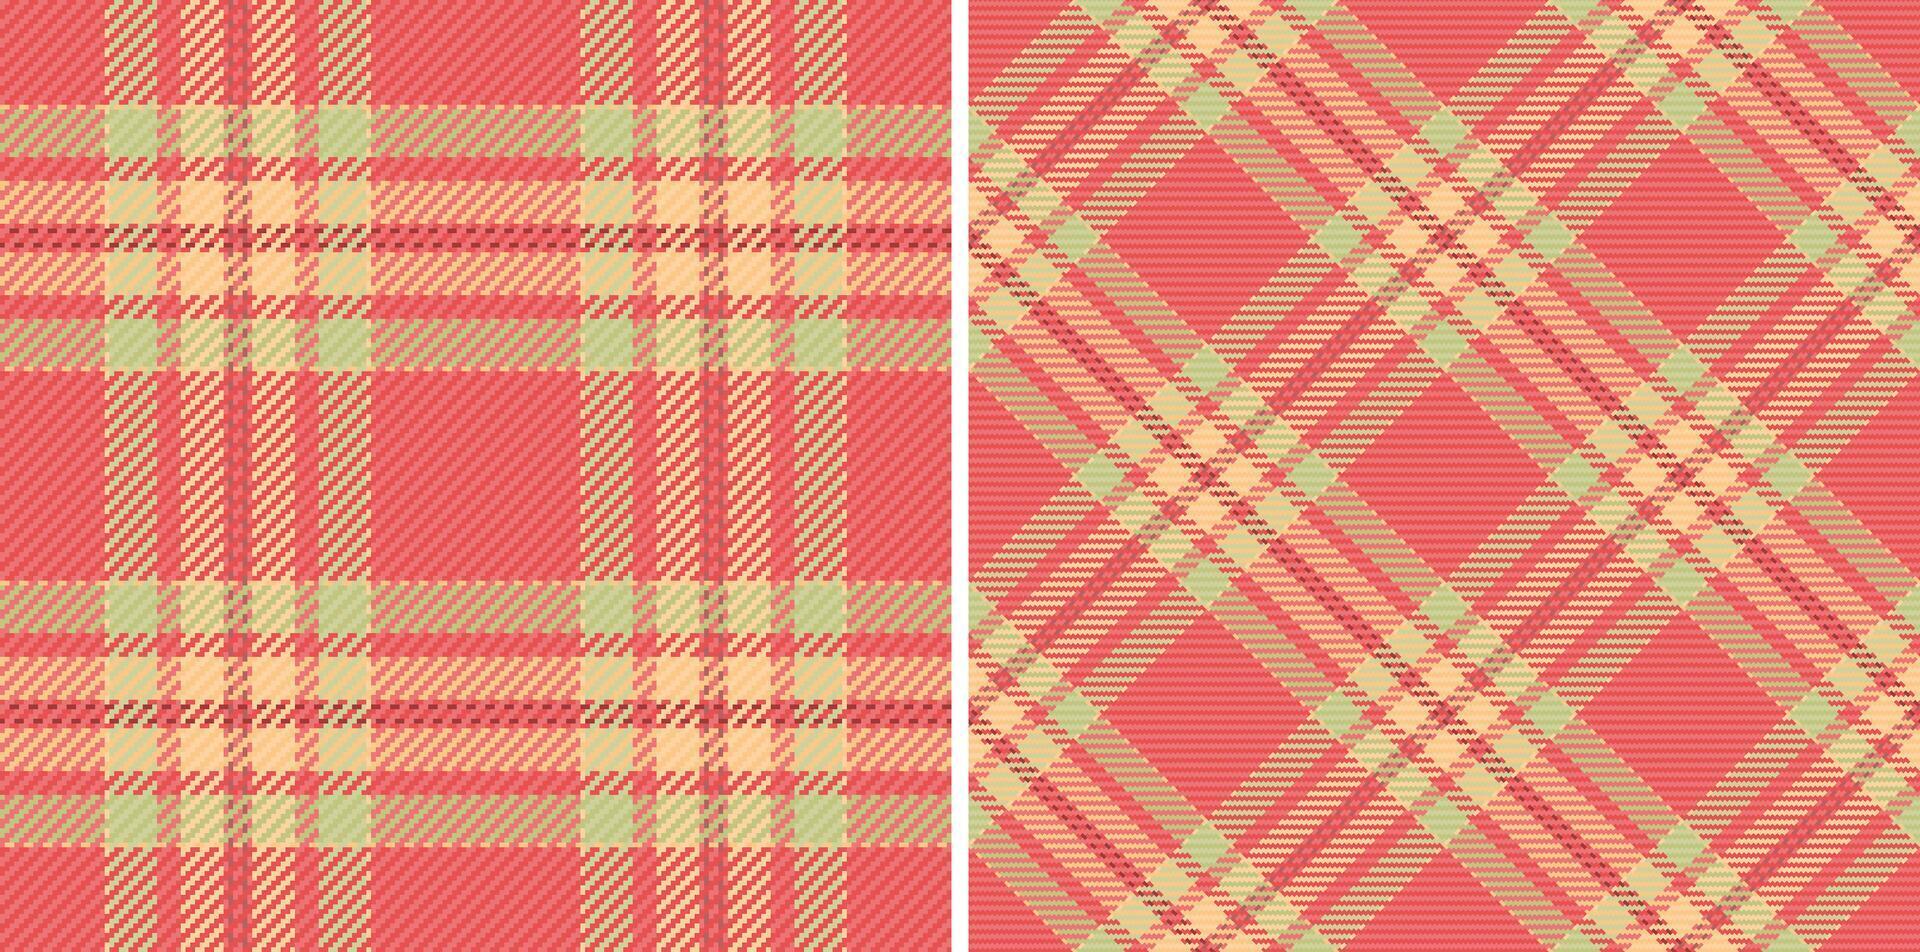 Pattern tartan textile of background seamless texture with a fabric vector plaid check. Set in fall colors for chic home decor ideas.